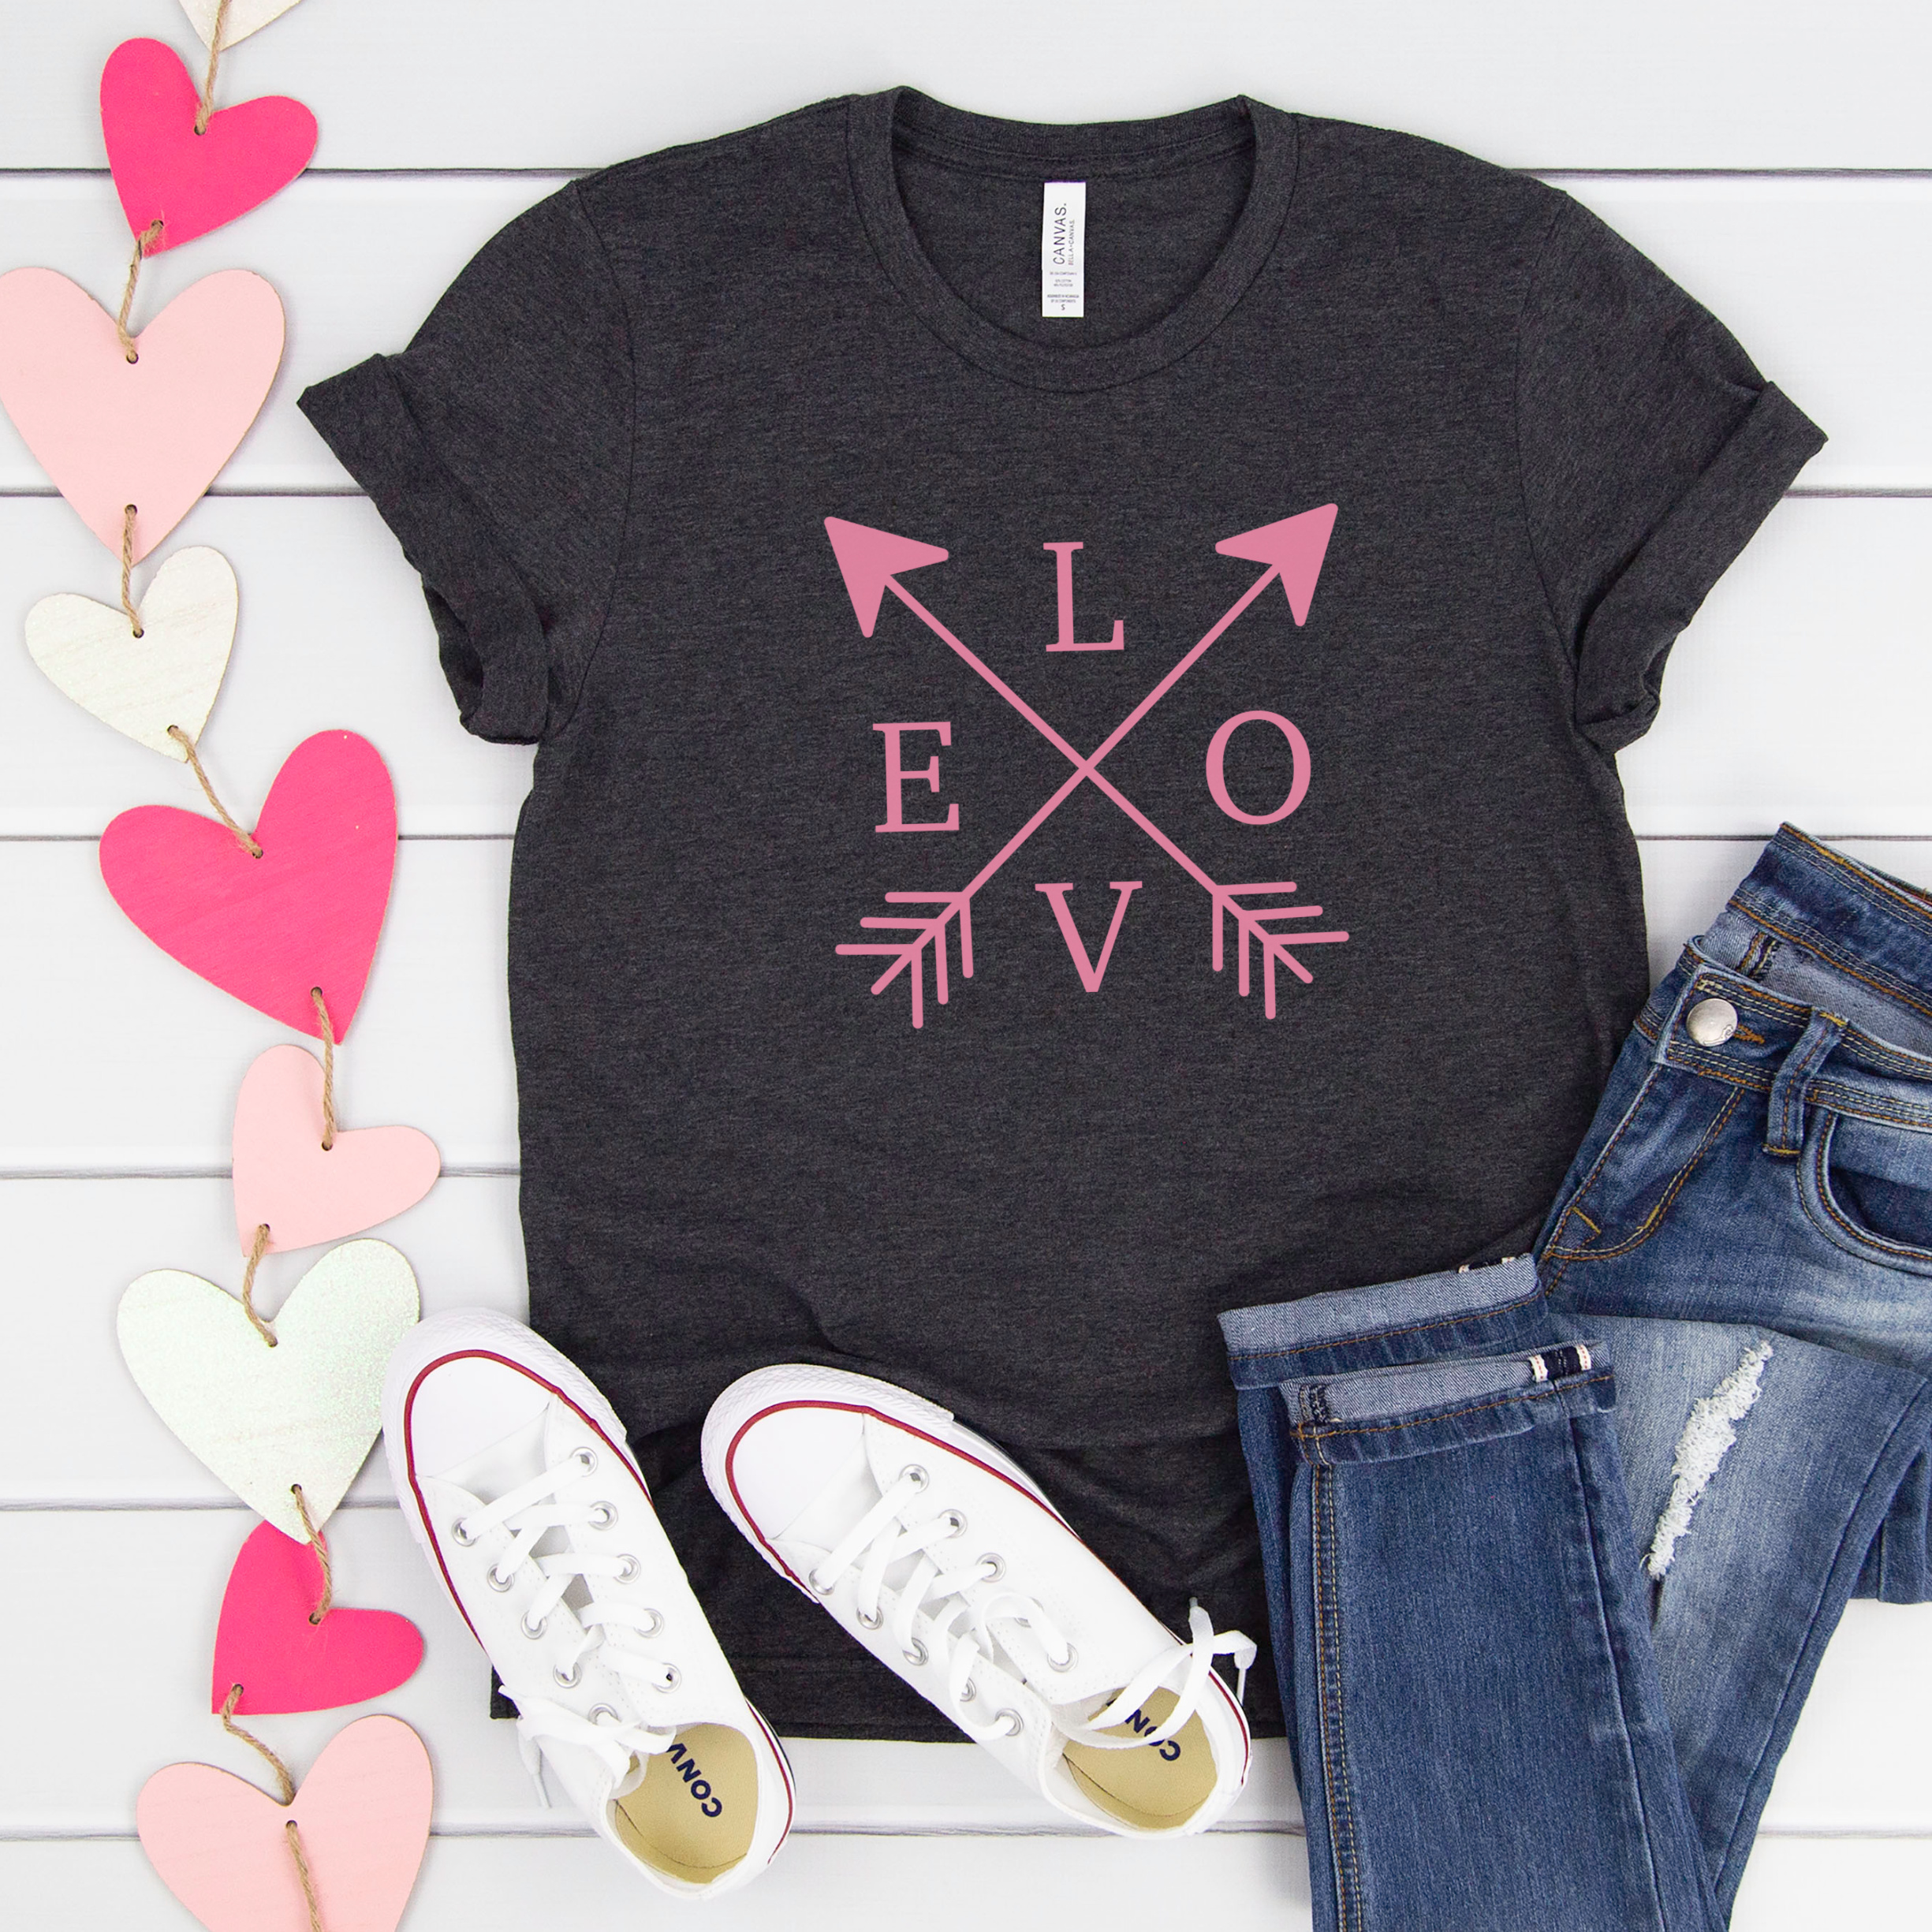 Cute Valentines shirt design Girl Valentine svg Girl Love shirt svg It's All About The XoXo svg Xo Xo svg Valentines day saying svg